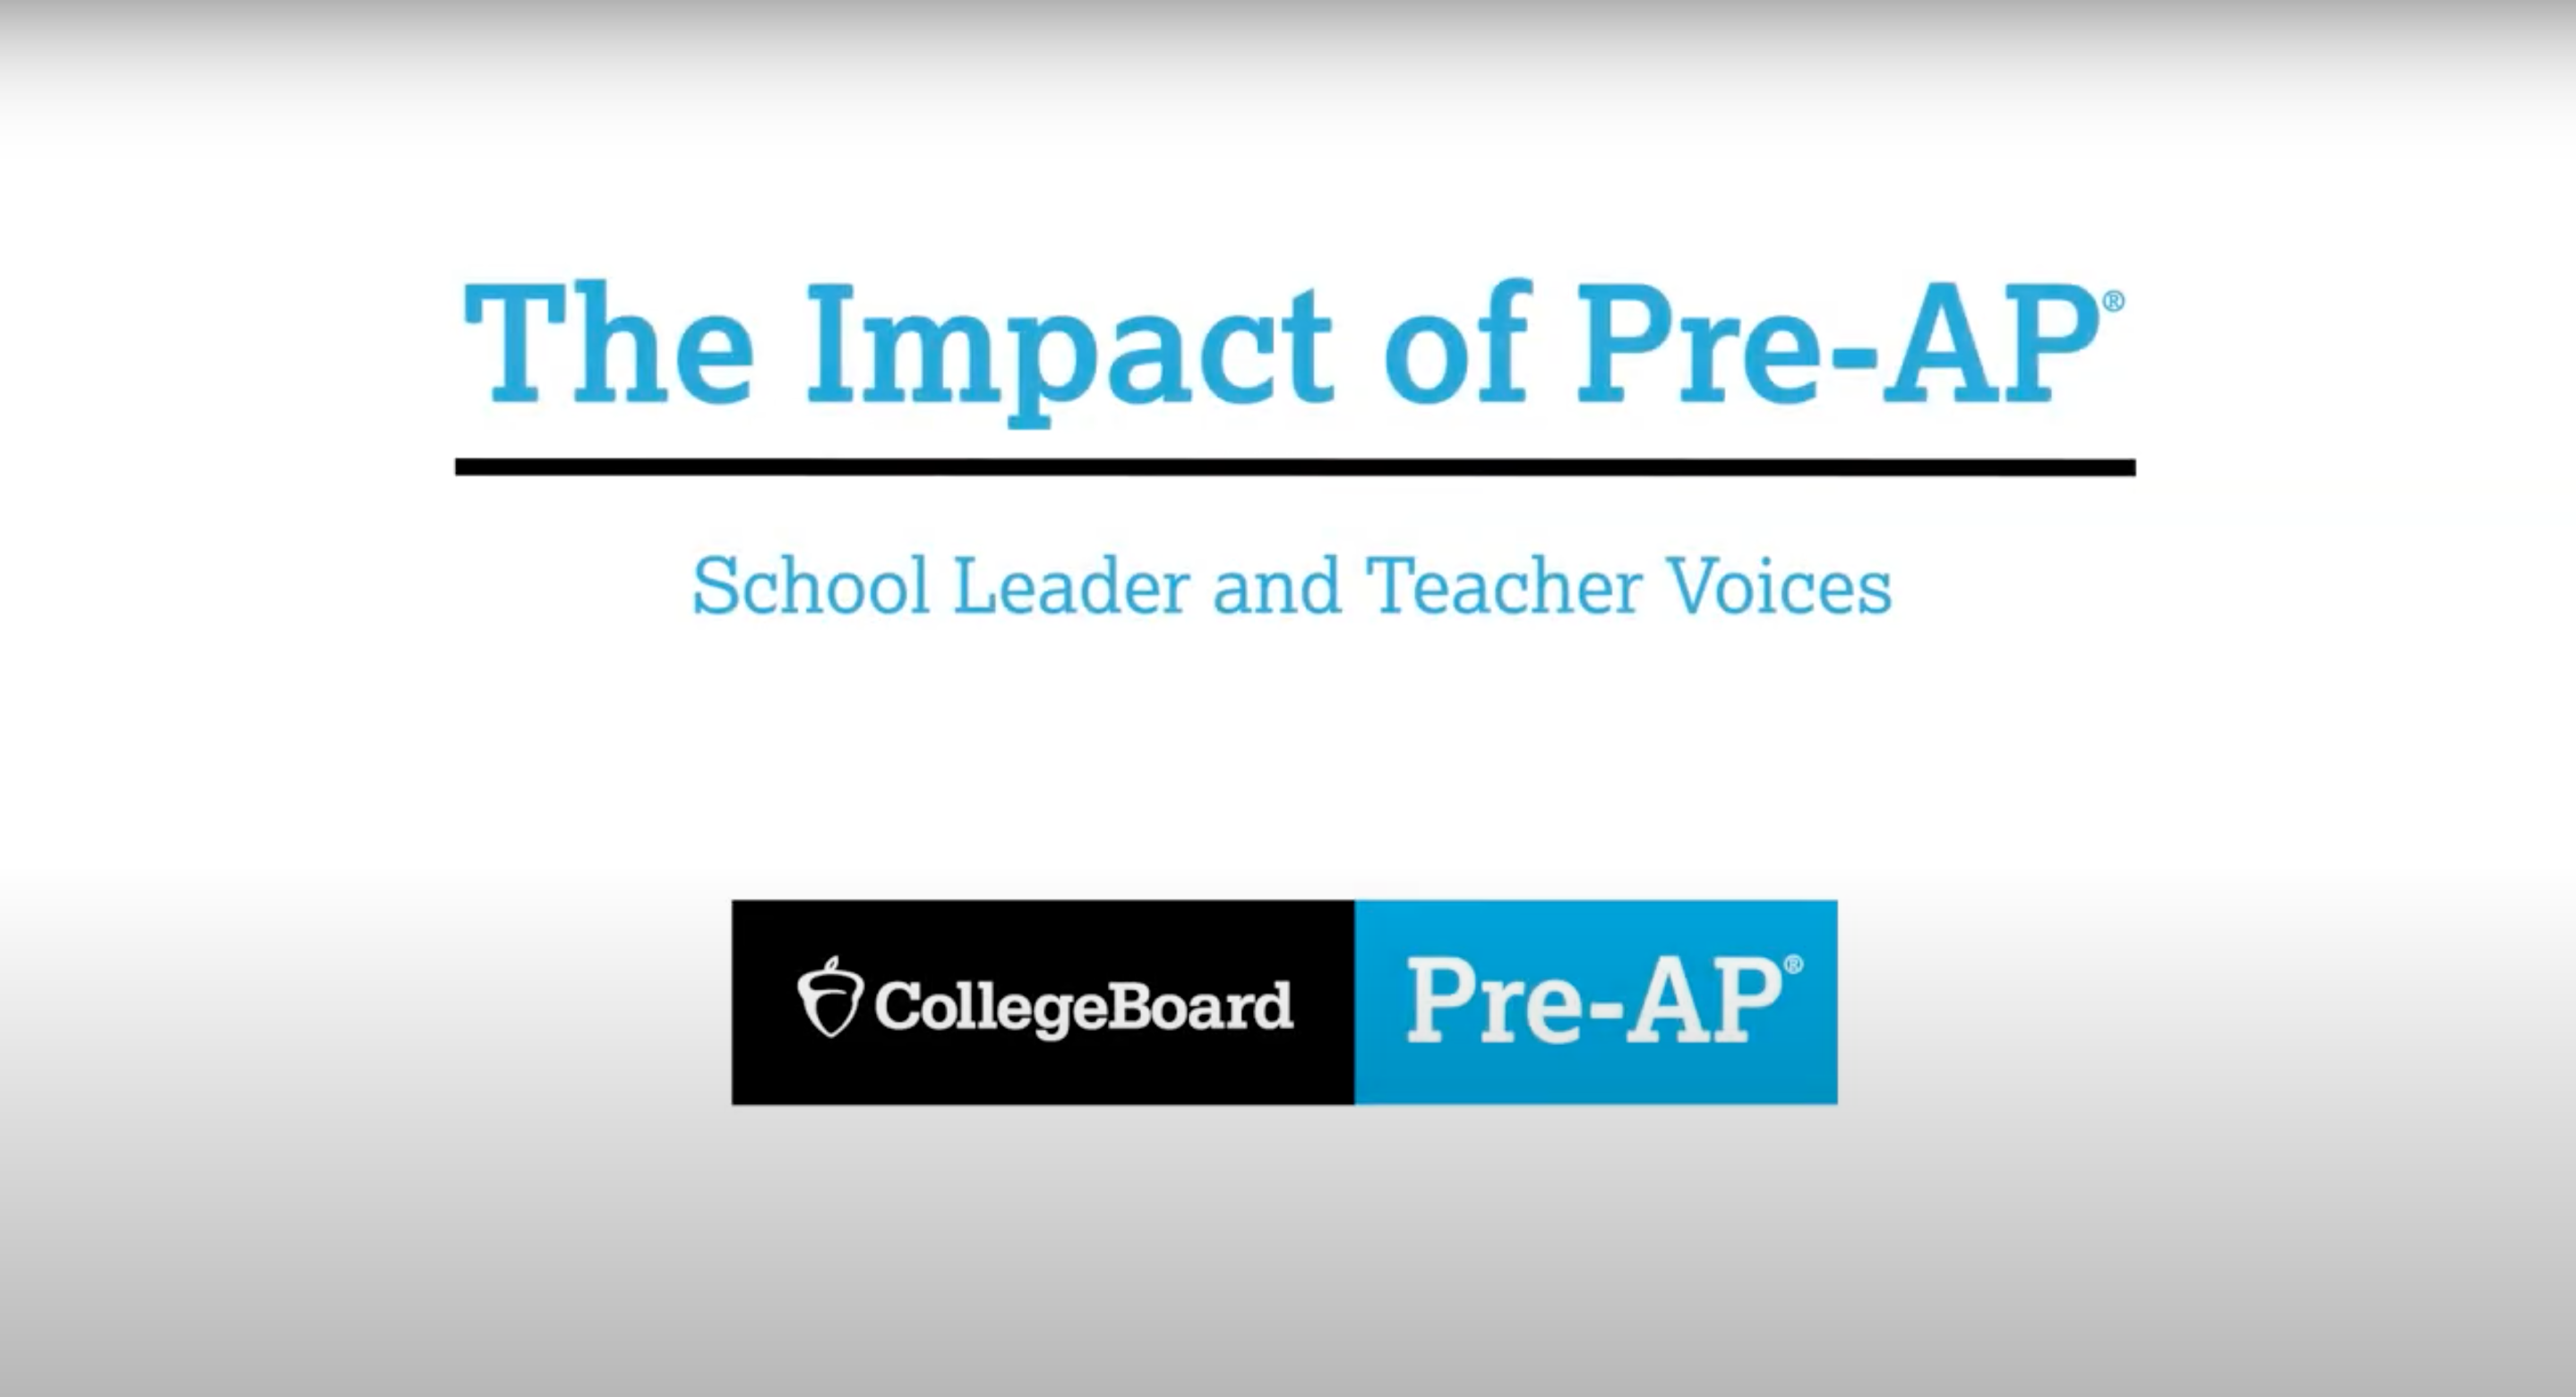 The Impact of Pre-AP School Leader and Teacher Voices Thumbnail with CollegeBoard Pre-AP Logo